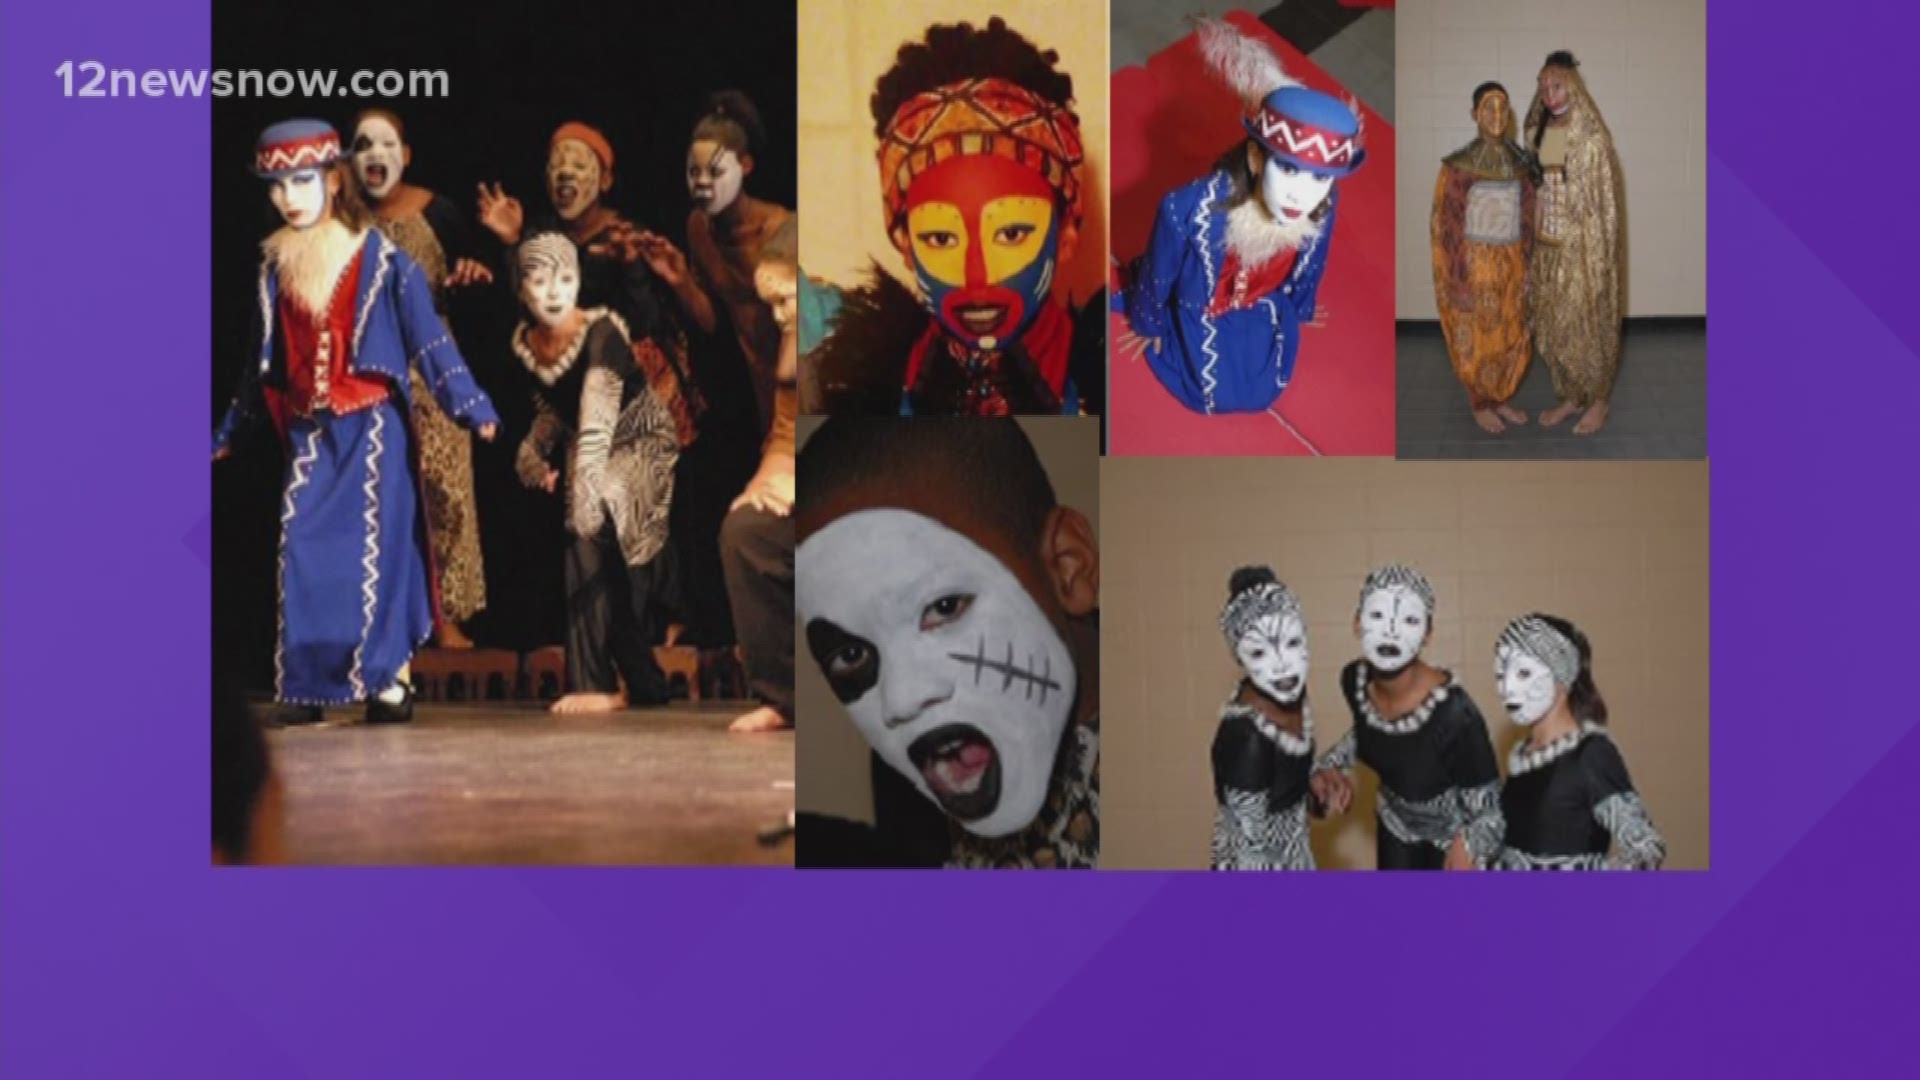 The Jonathan Williams Center for Performing Arts summer camp to Perform 'The Lion King"